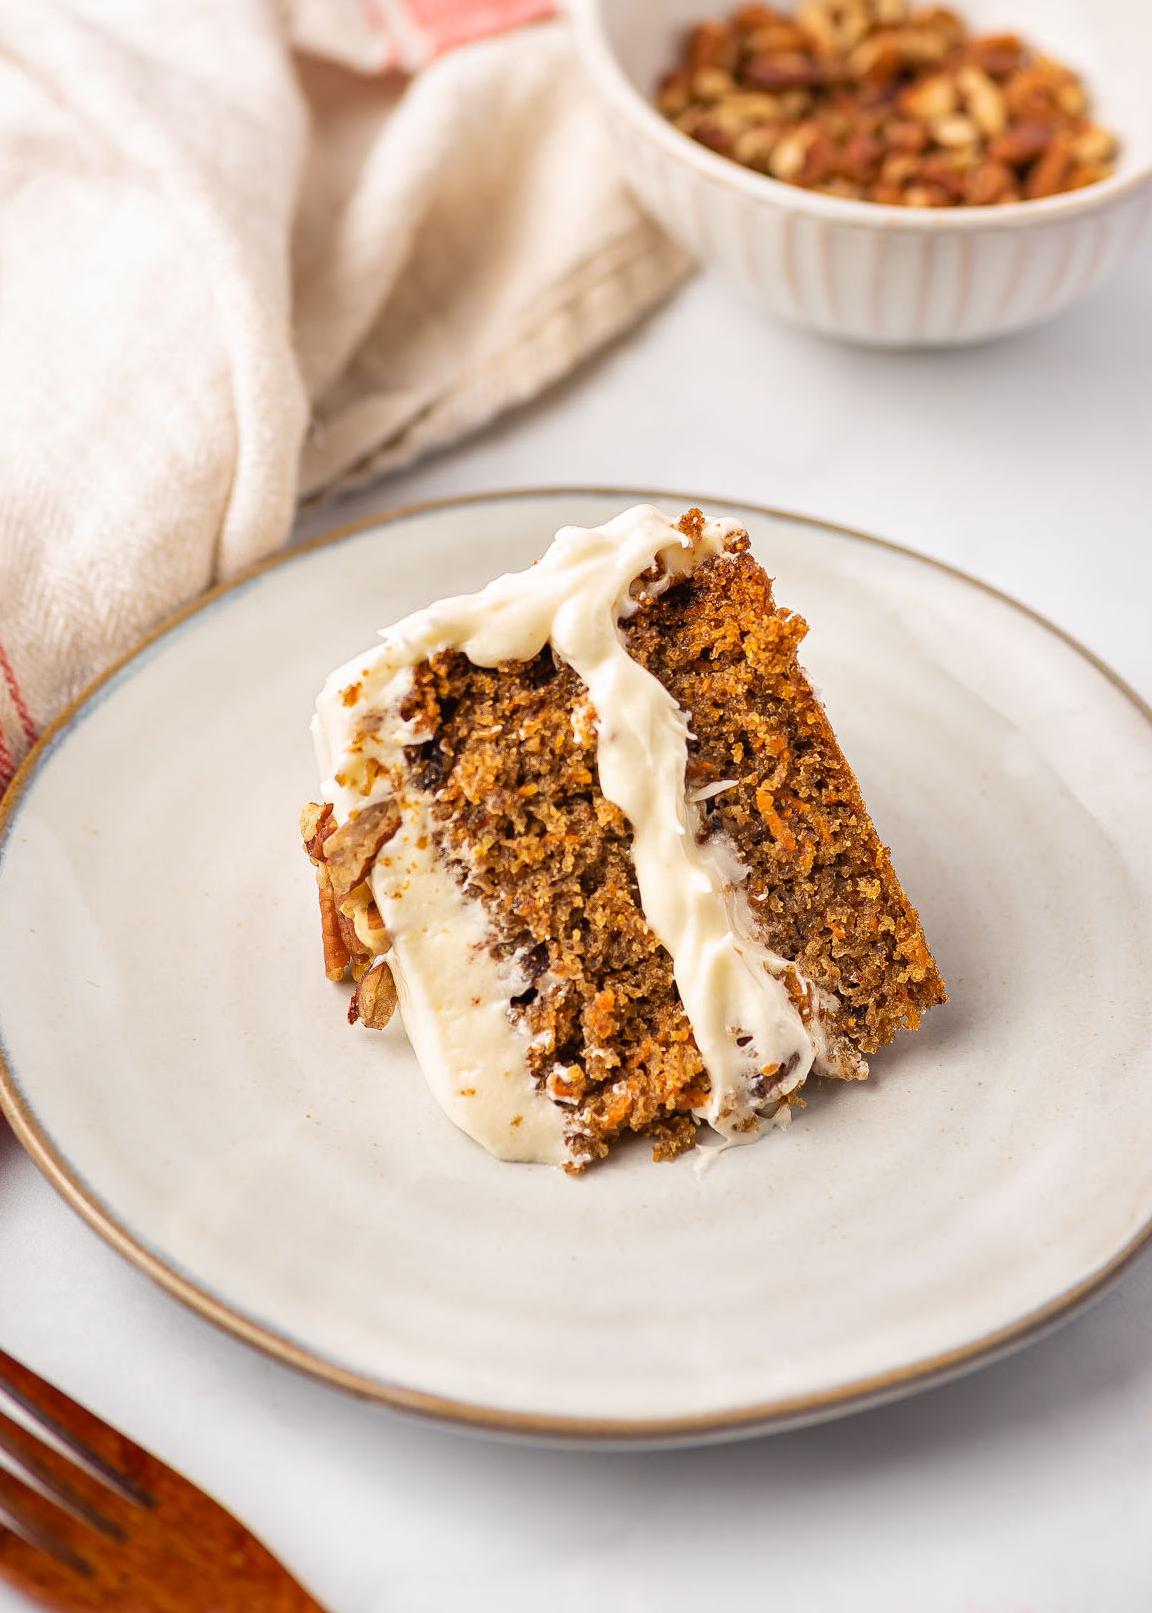  Carrots for breakfast? No problem with this delicious cake recipe.